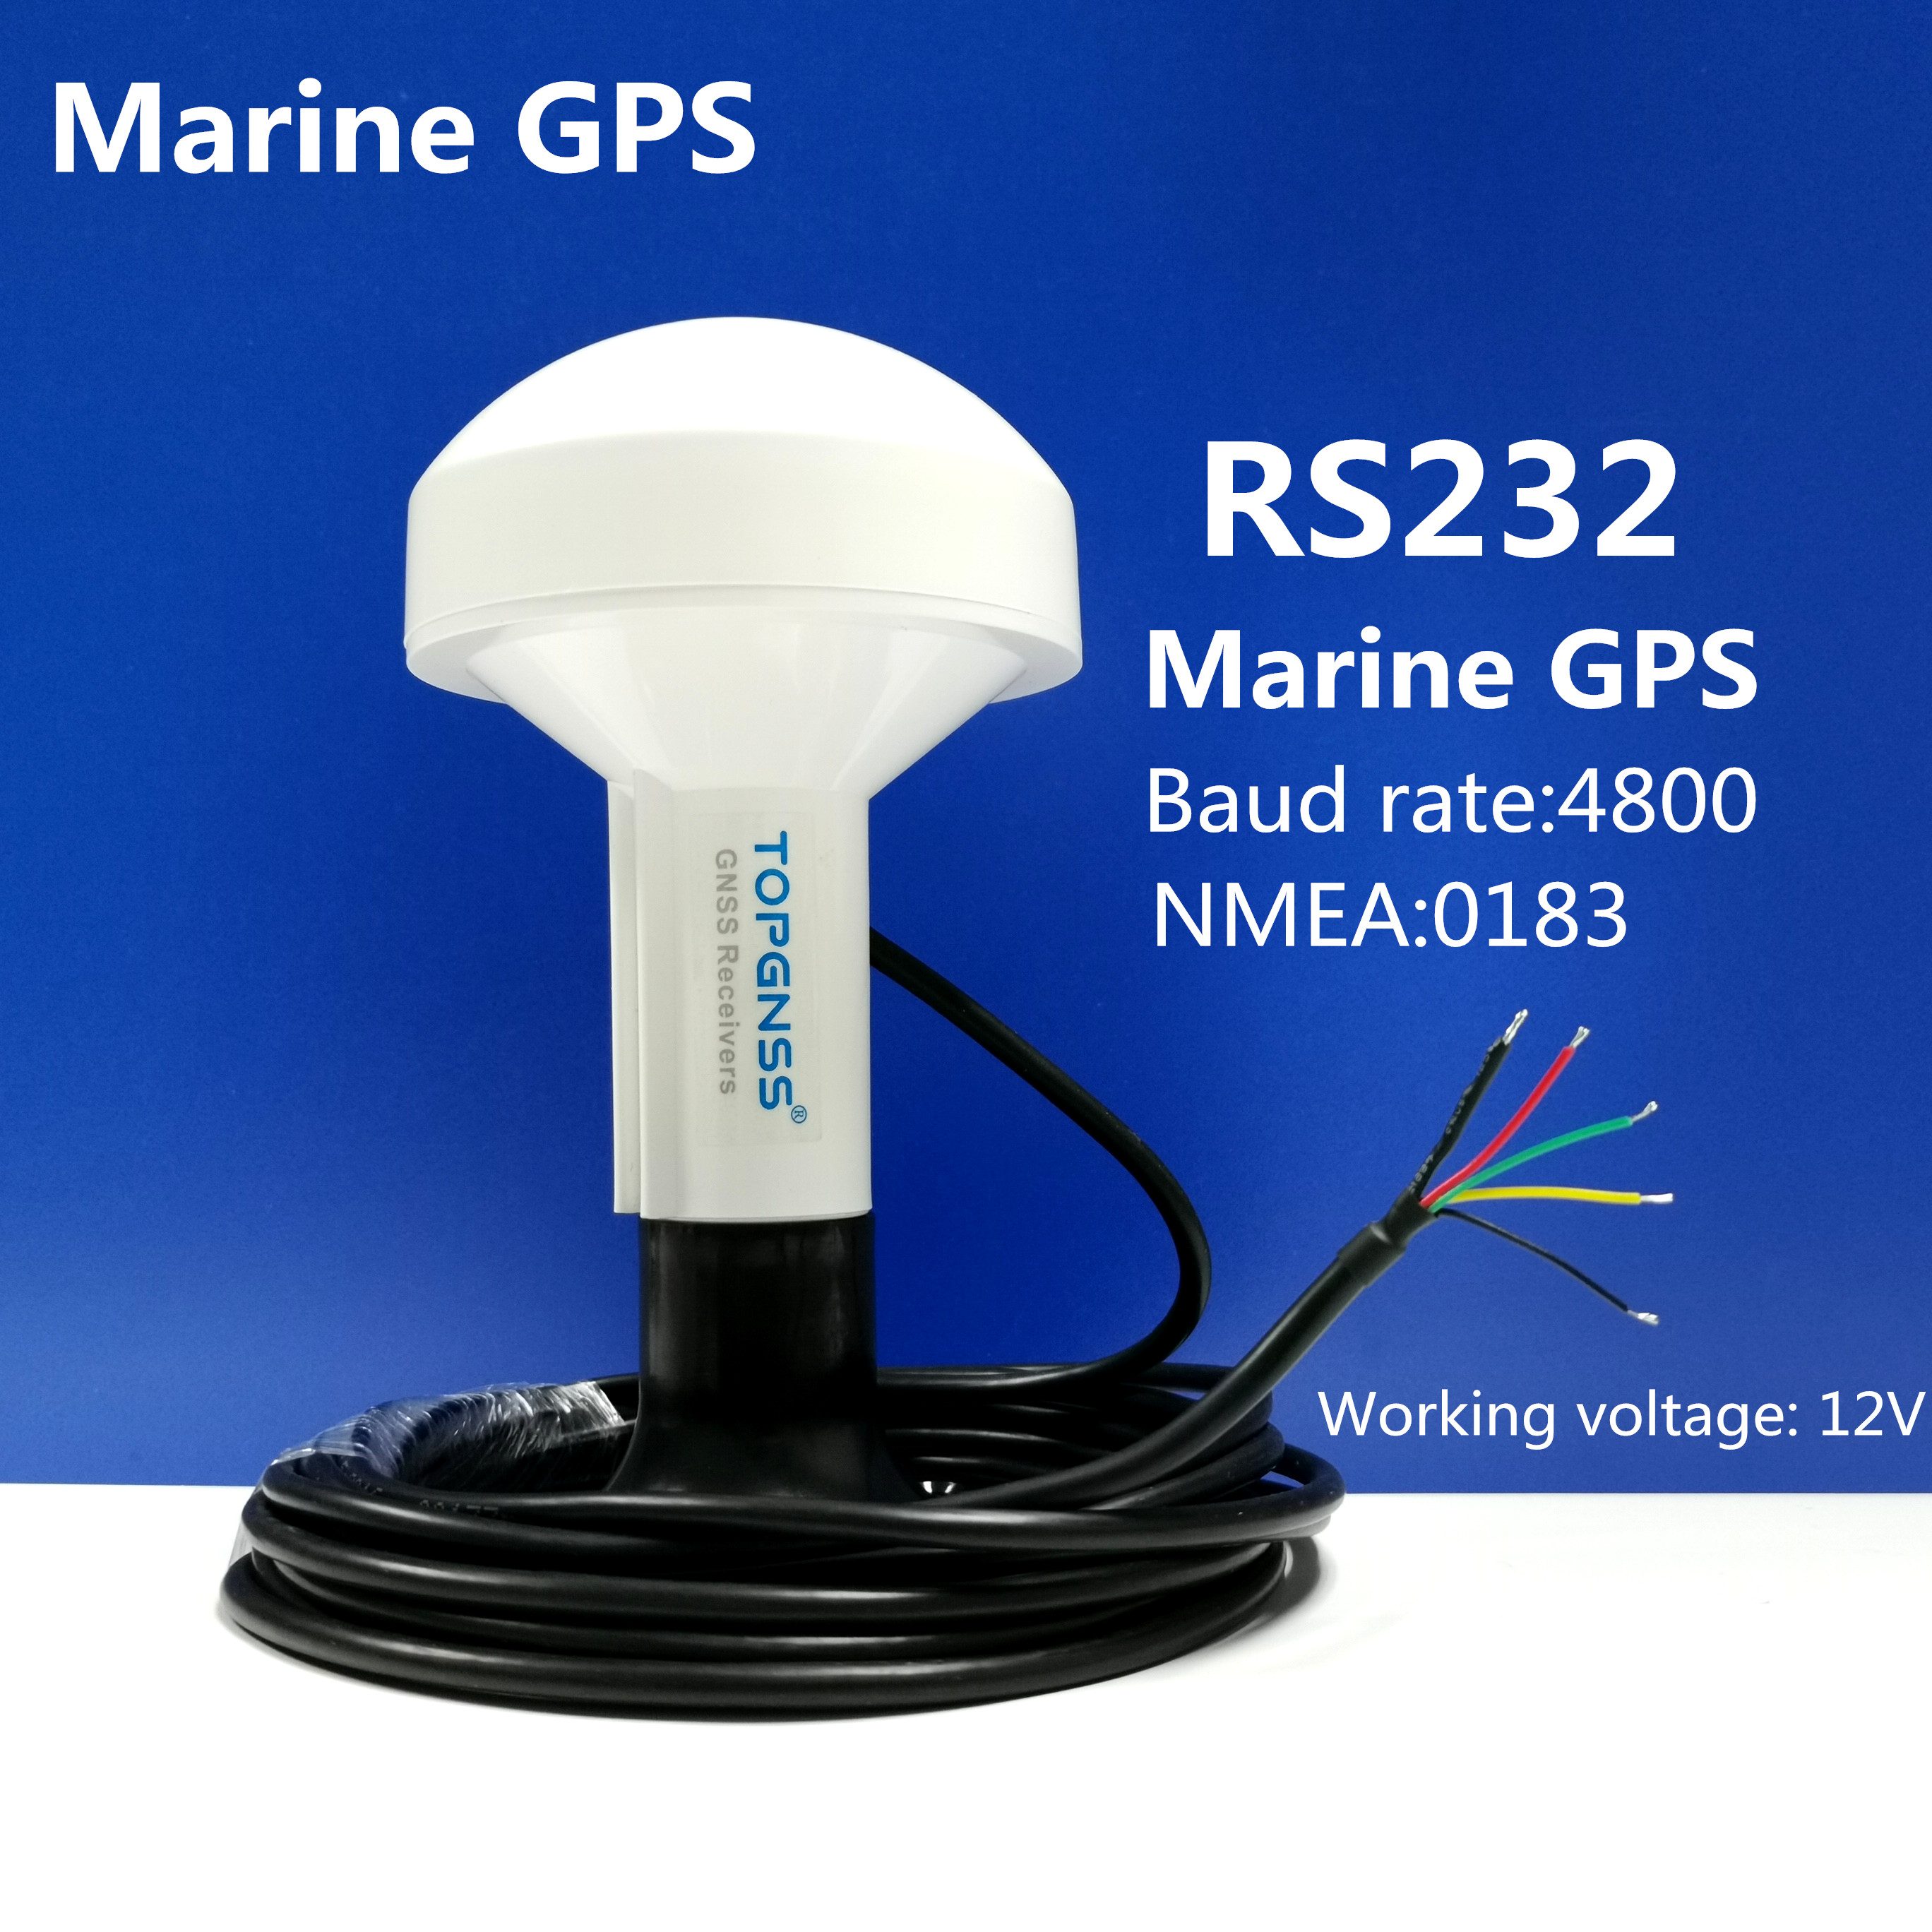 4800 baud rate 12V RS232 NMEA protocol GPS chips boat marine GPS receiver module antenna RS-232, Mushroom housing with bracket